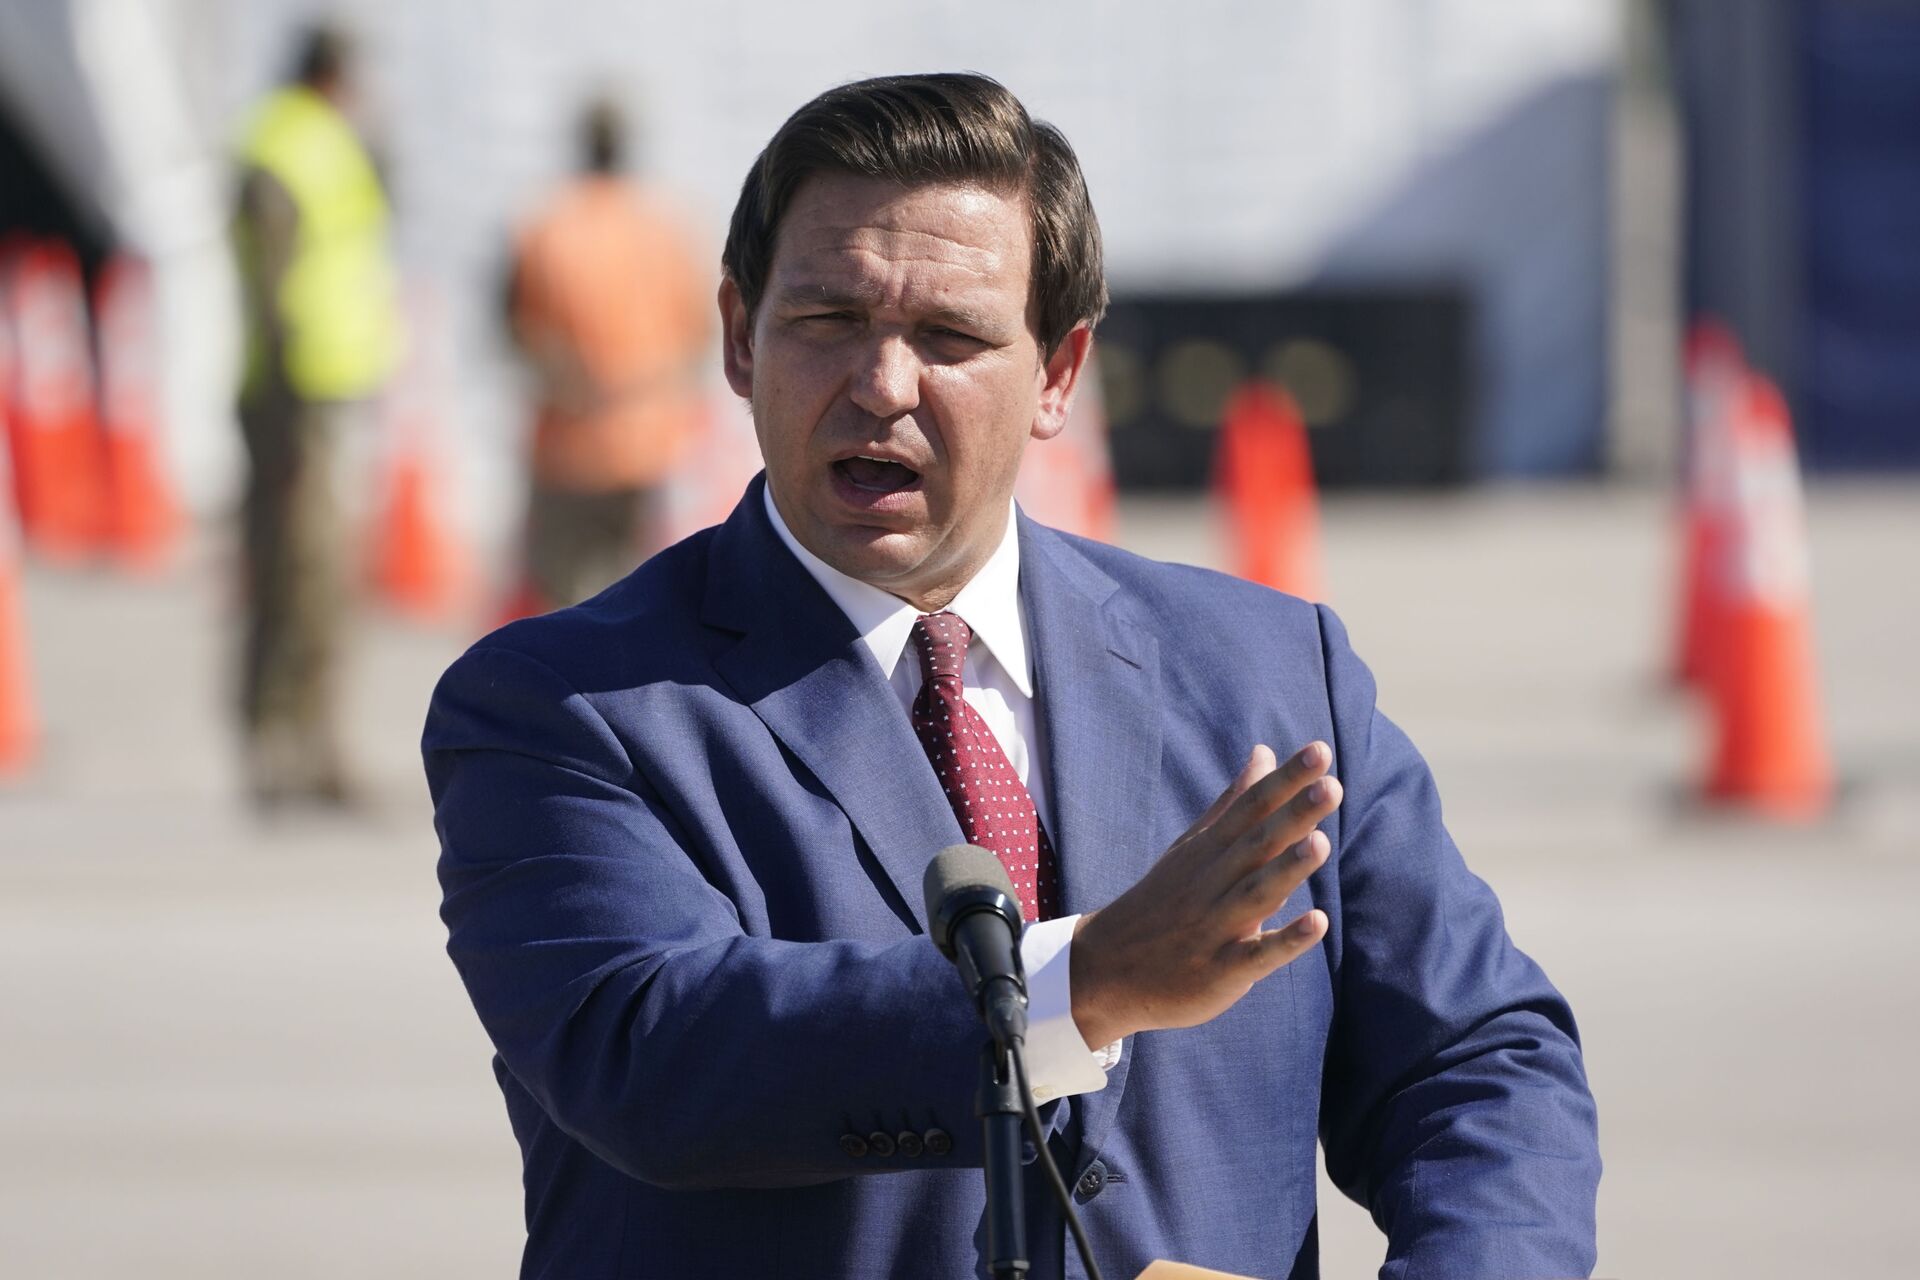 Florida Gov. Ron DeSantis speaks at a COVID-19 testing site, Wednesday, Jan. 6, 2021, outside Hard Rock Stadium in Miami Gardens, Fla. First responders and people over 65 years-old began receiving the COVID-19 vaccine Wednesday during a trial run of the site which will open to seniors at a later date. (AP Photo/Wilfredo Lee) - Sputnik International, 1920, 07.09.2021